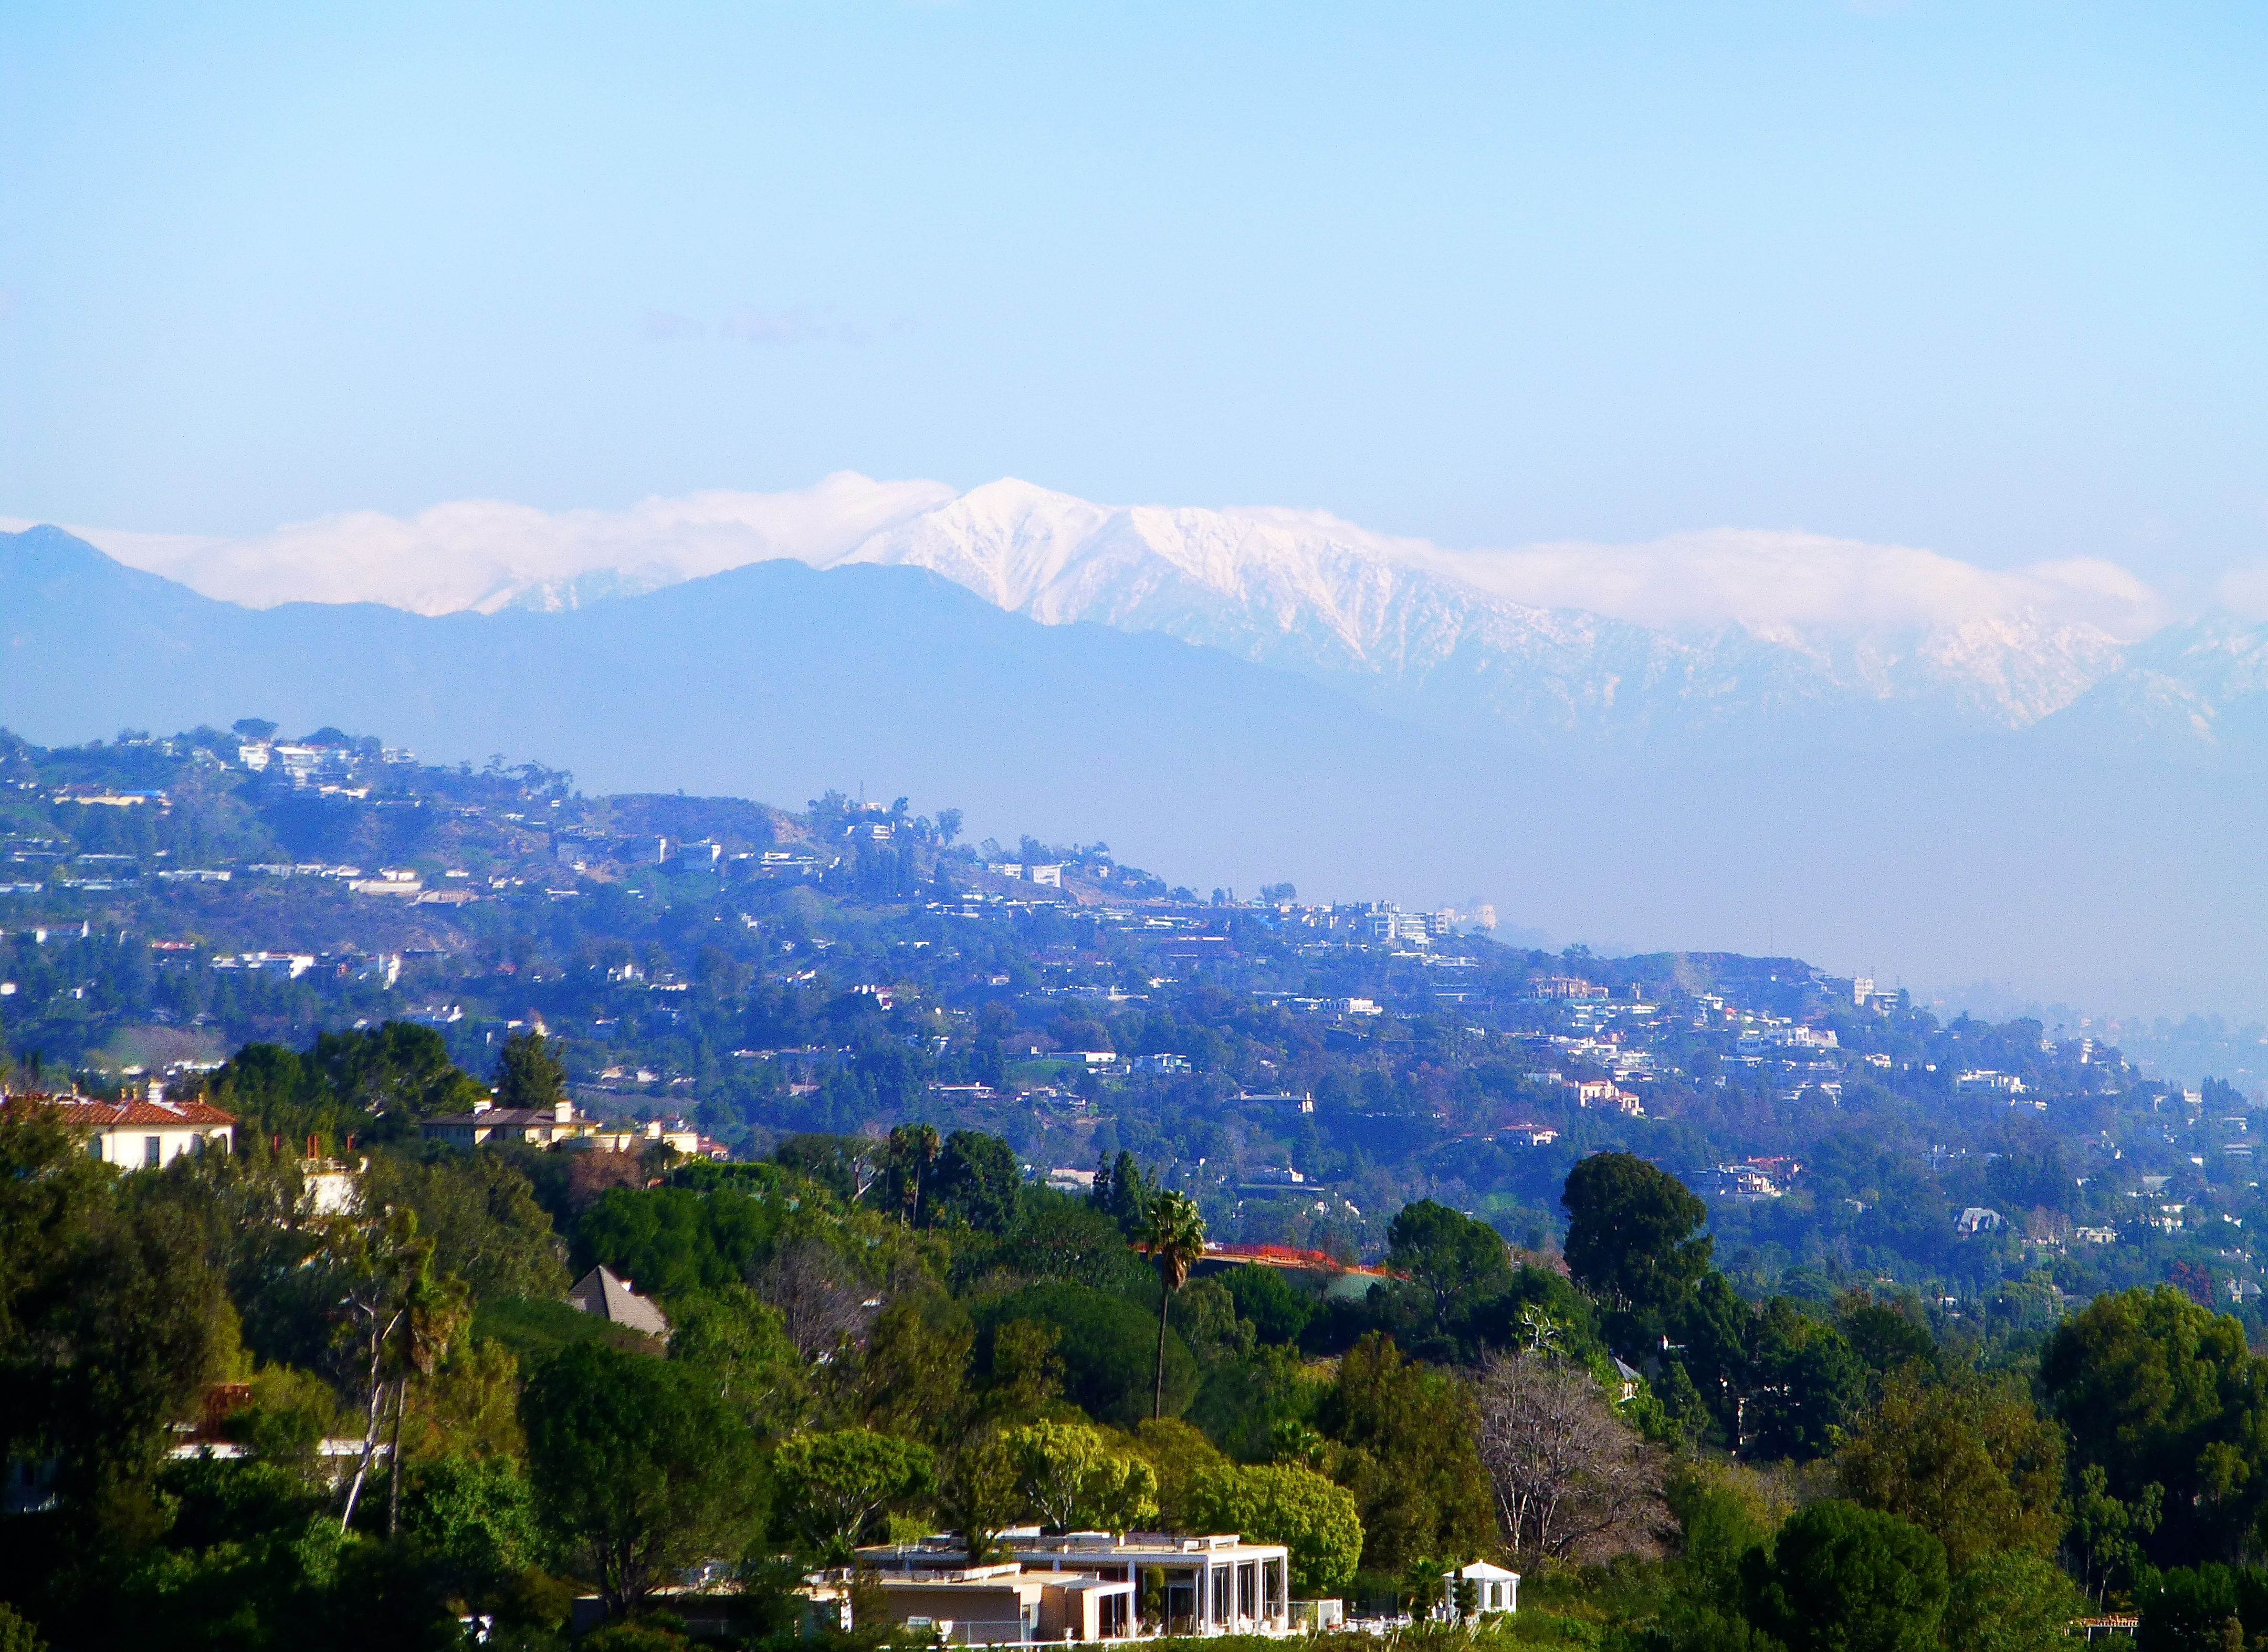 View of snow in the distance from the Getty